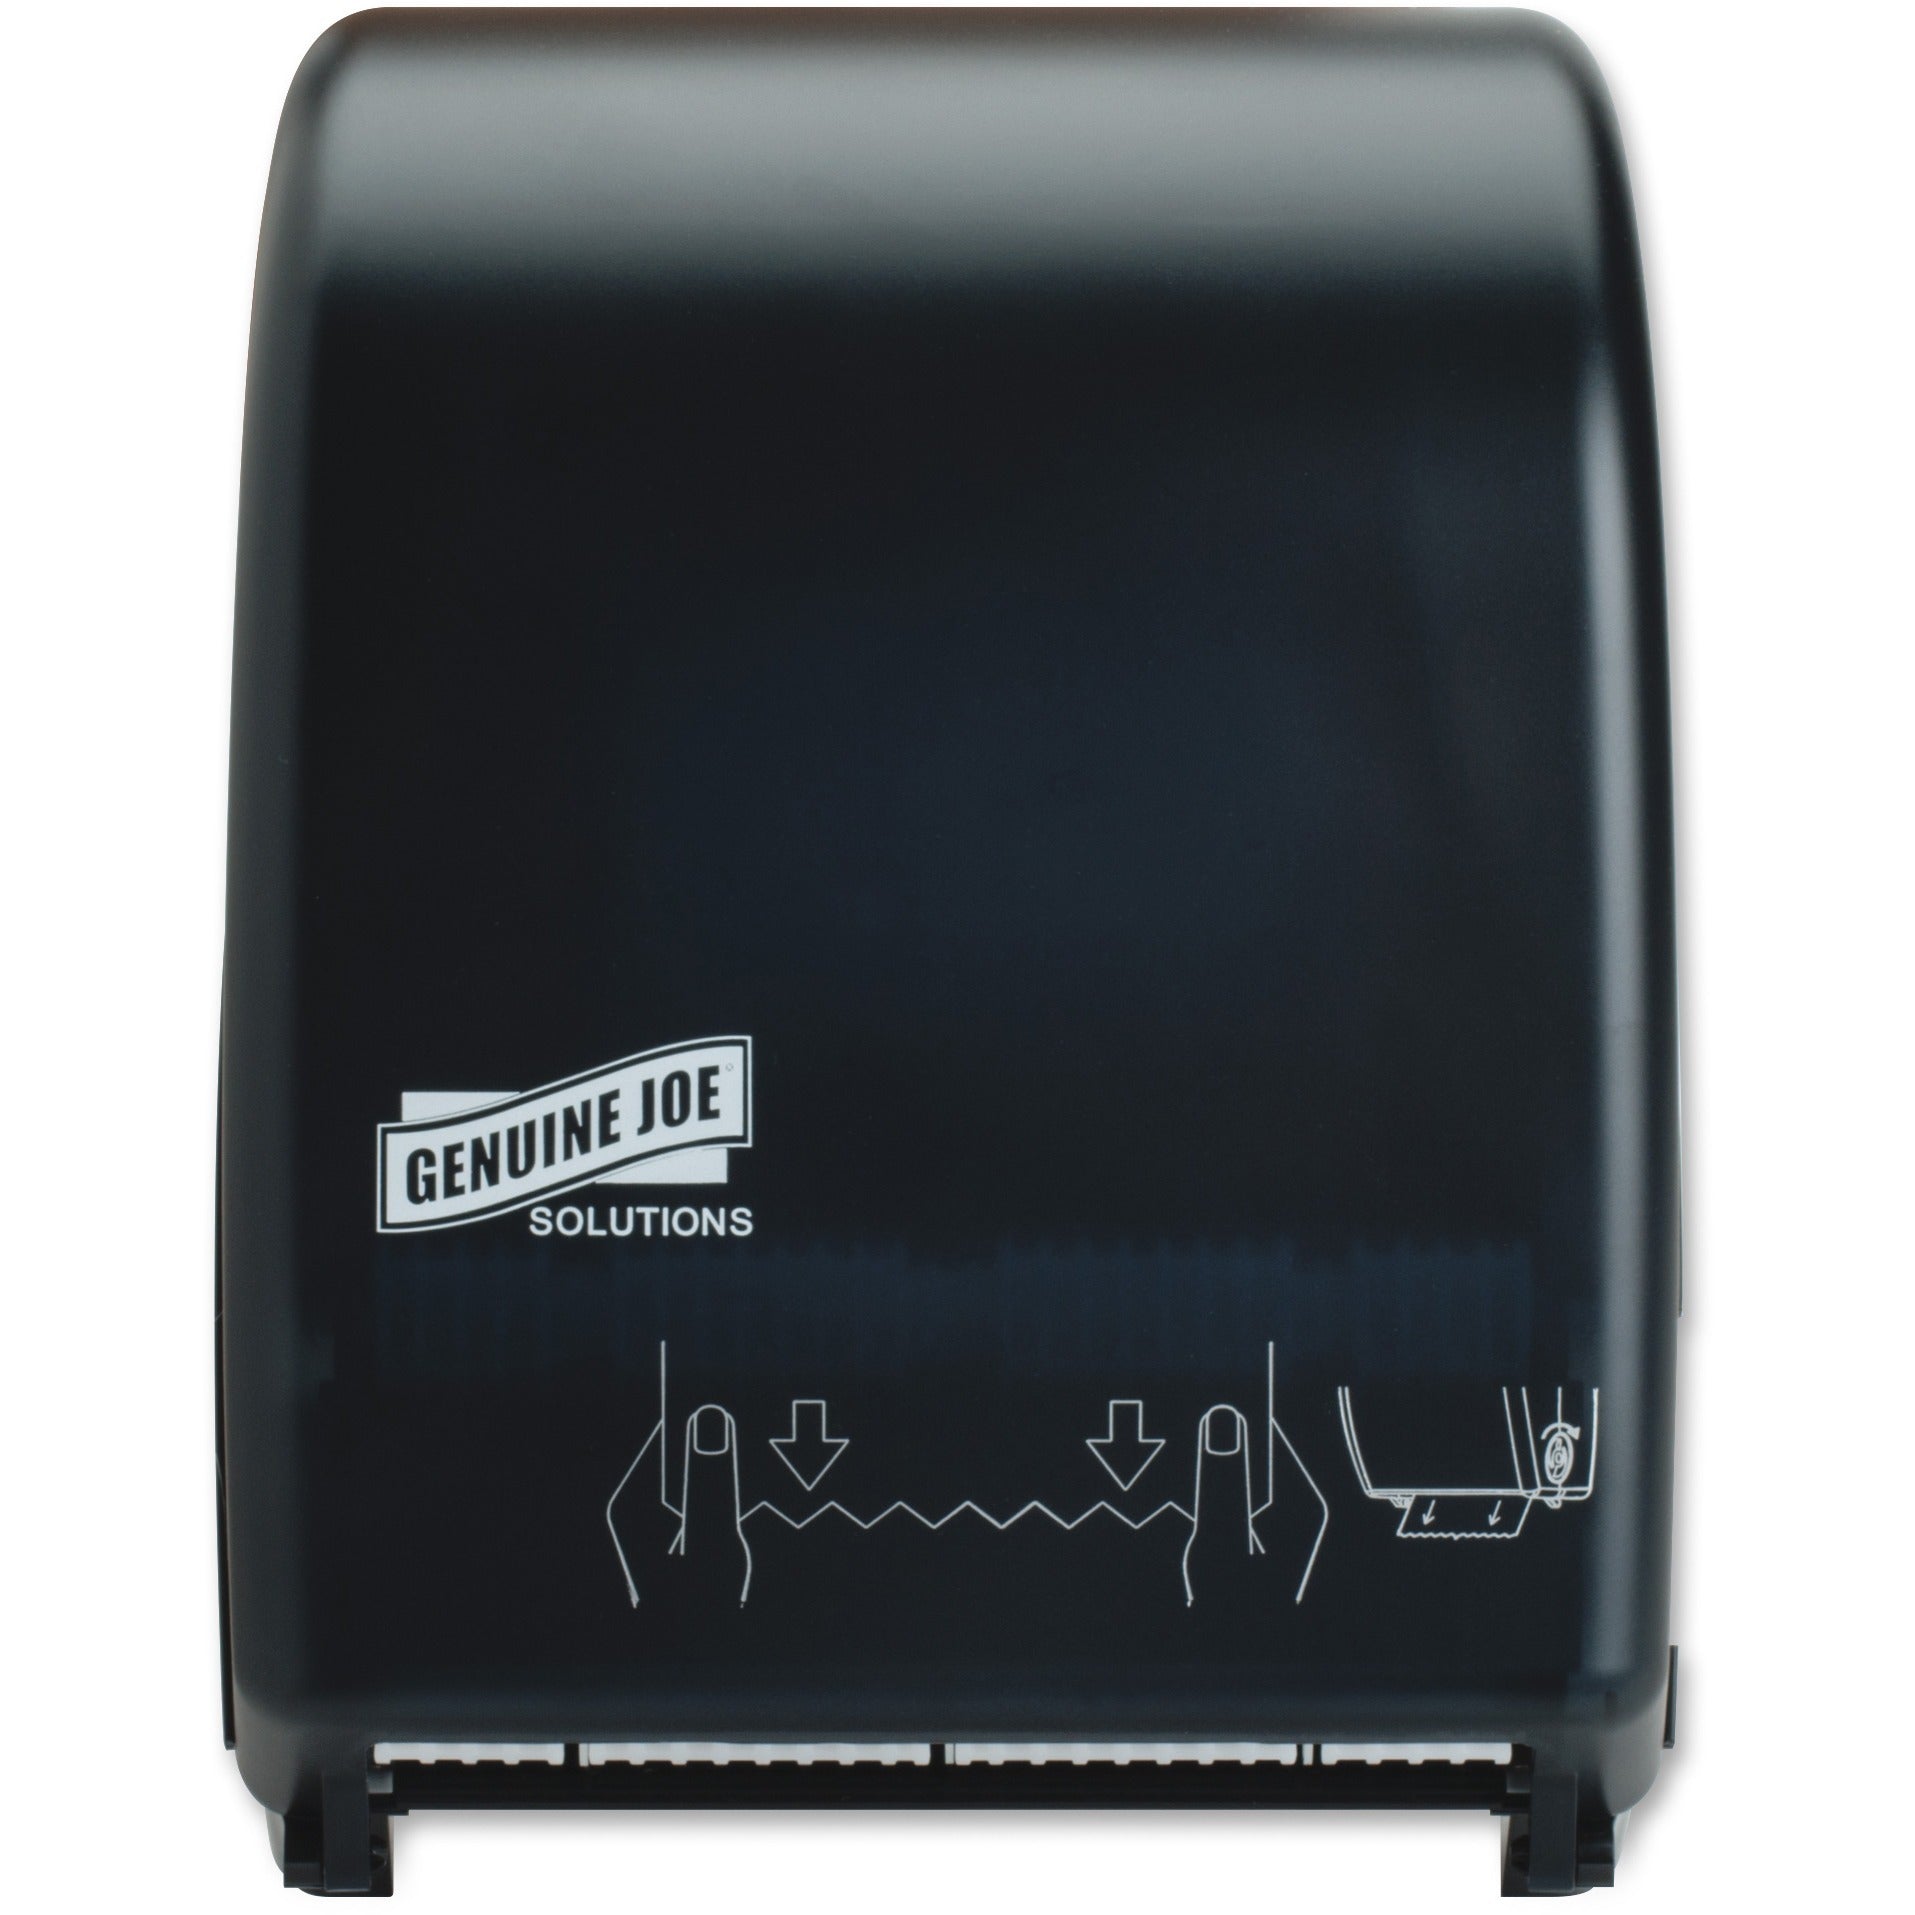 Genuine Joe Solutions Touchless Hardwound Towel Dispenser - Touchless, Hardwound Roll - Black - Touch-free, Anti-bacterial - 1 Each - 2